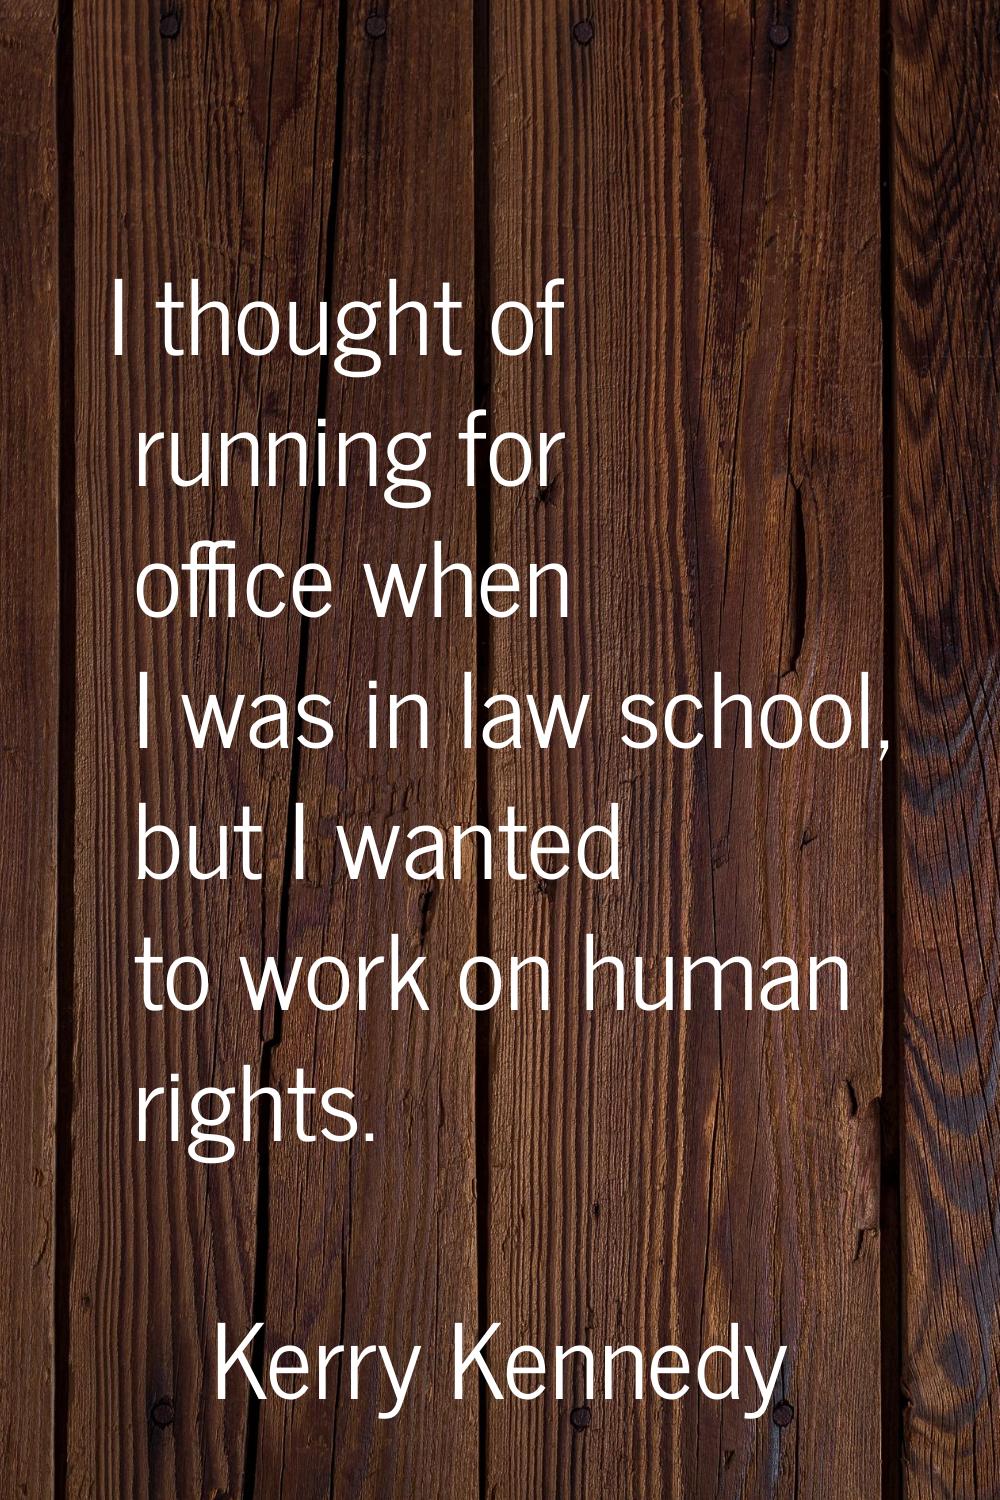 I thought of running for office when I was in law school, but I wanted to work on human rights.